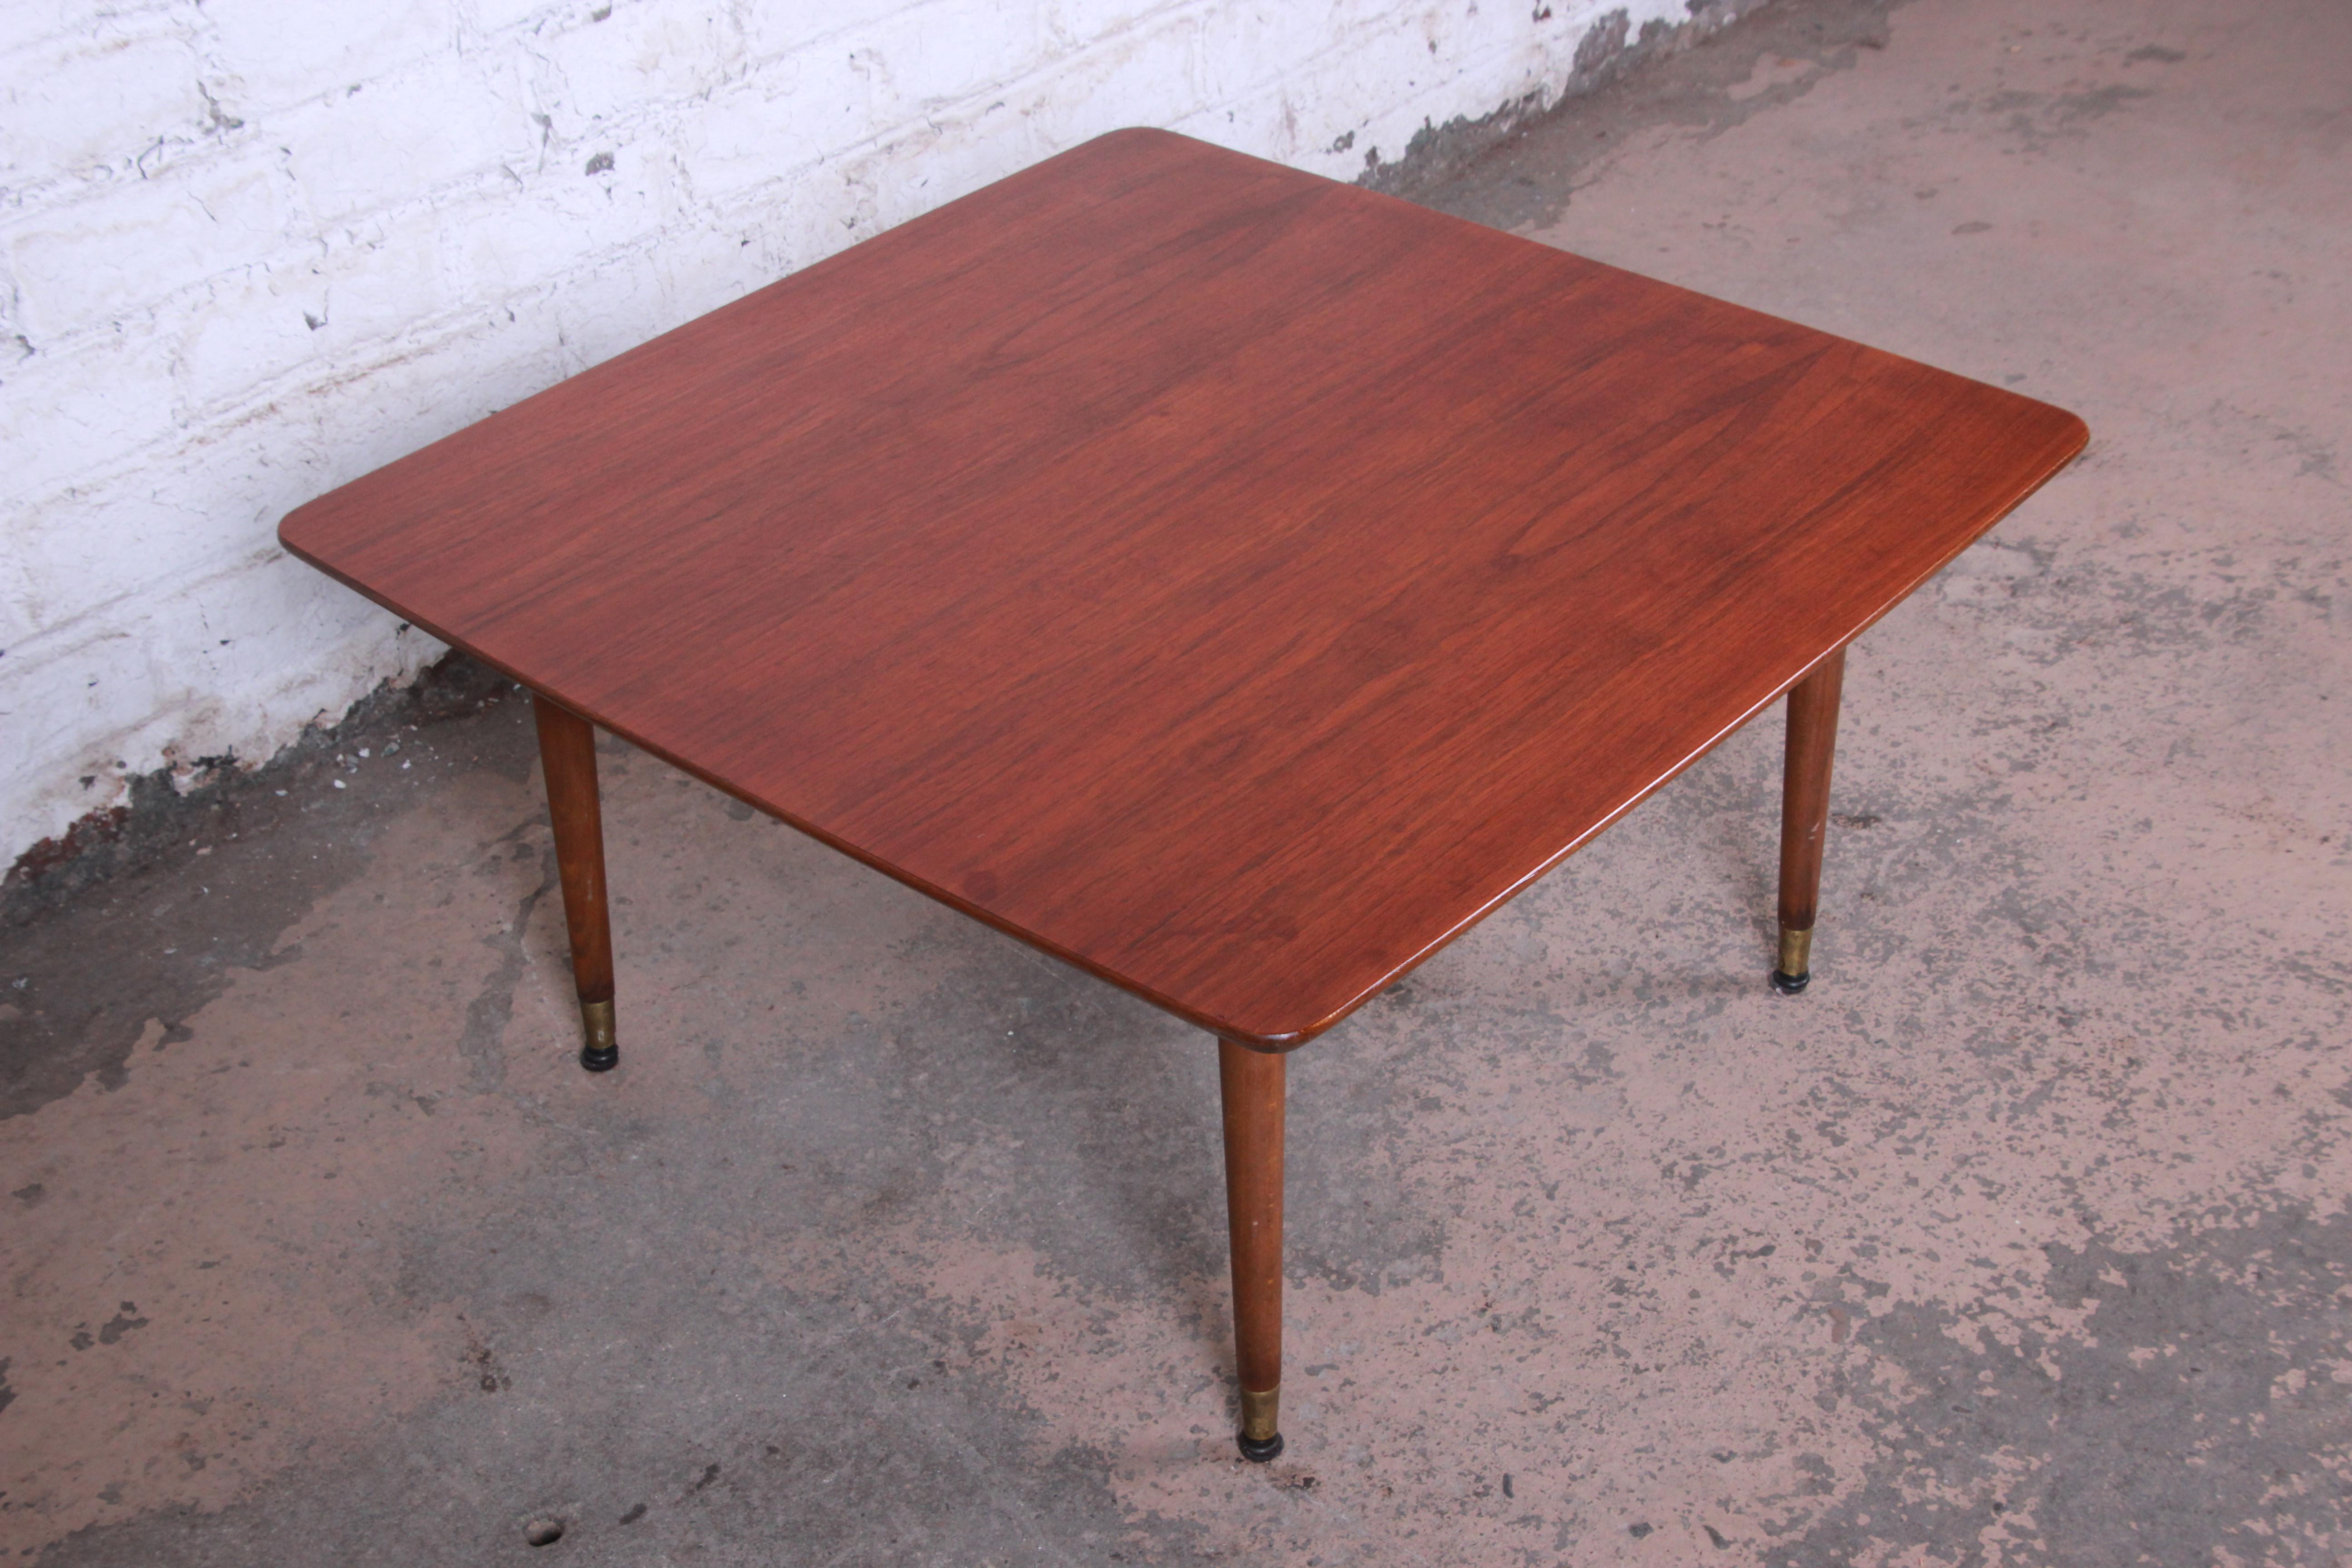 Offering a gorgeous Mid-Century Modern Swedish coffee table attributed to Folke Ohlsson for DUX. The table features beautiful walnut wood grain and sleek Scandinavian design. The table rests on four tall solid walnut brass-tipped pencil legs. Marked